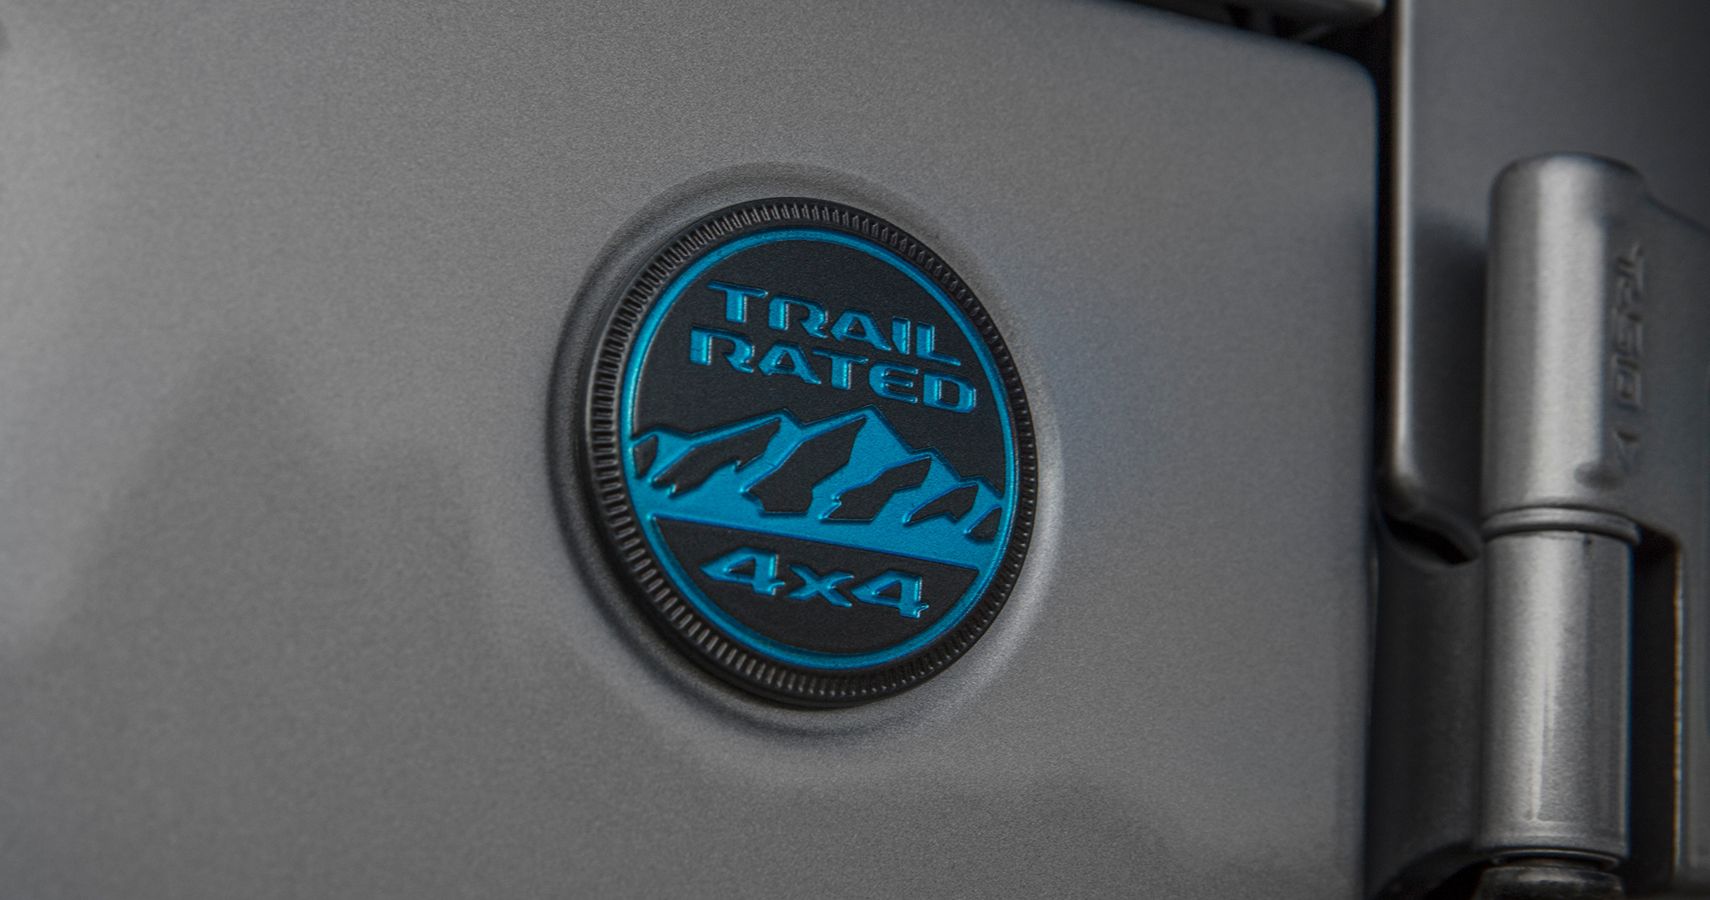 Trail Rated badge on 4xe